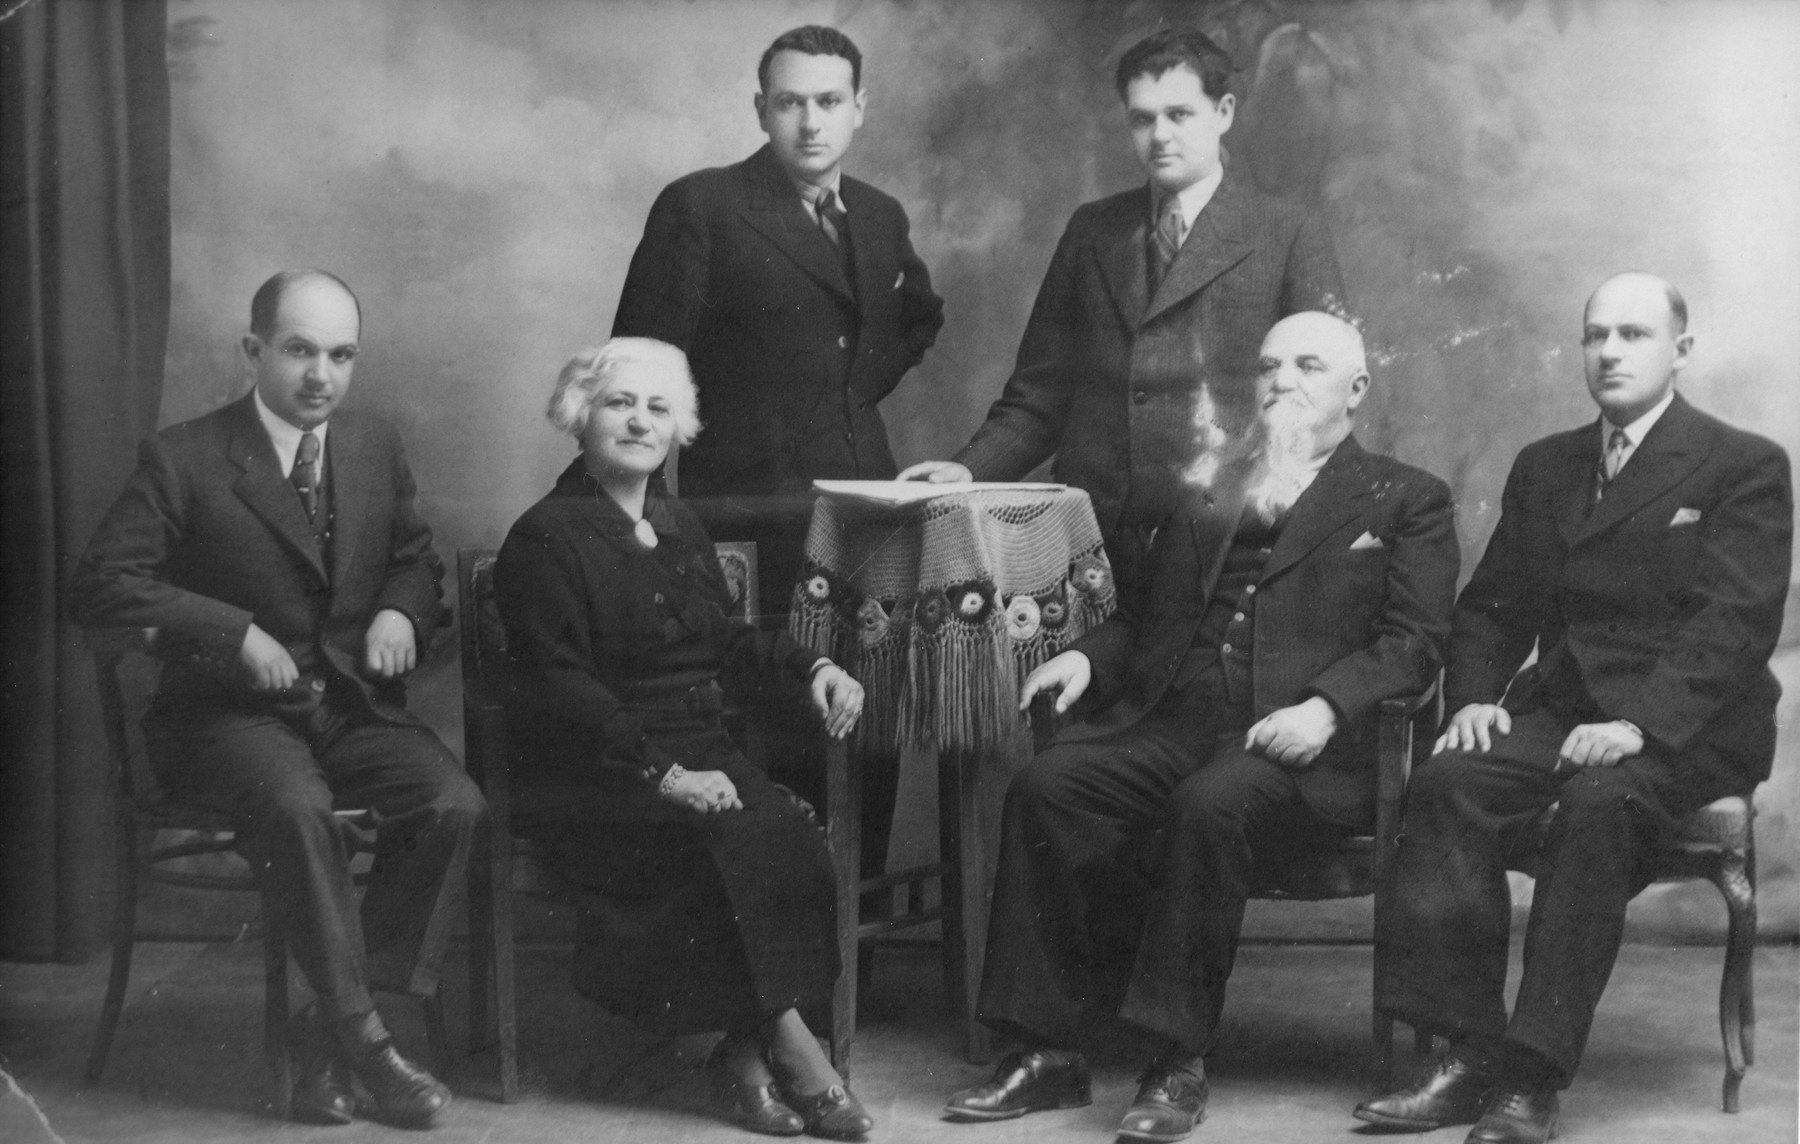 Portrait of the Preiss family in Kotoriba, Yugoslavia.
Pictured are Samu and Helen Rosenfeld Preiss and their four grown sons: Pista, Jani, Laci, and Bubi.  Samu and Helen were the donor's uncle and aunt.